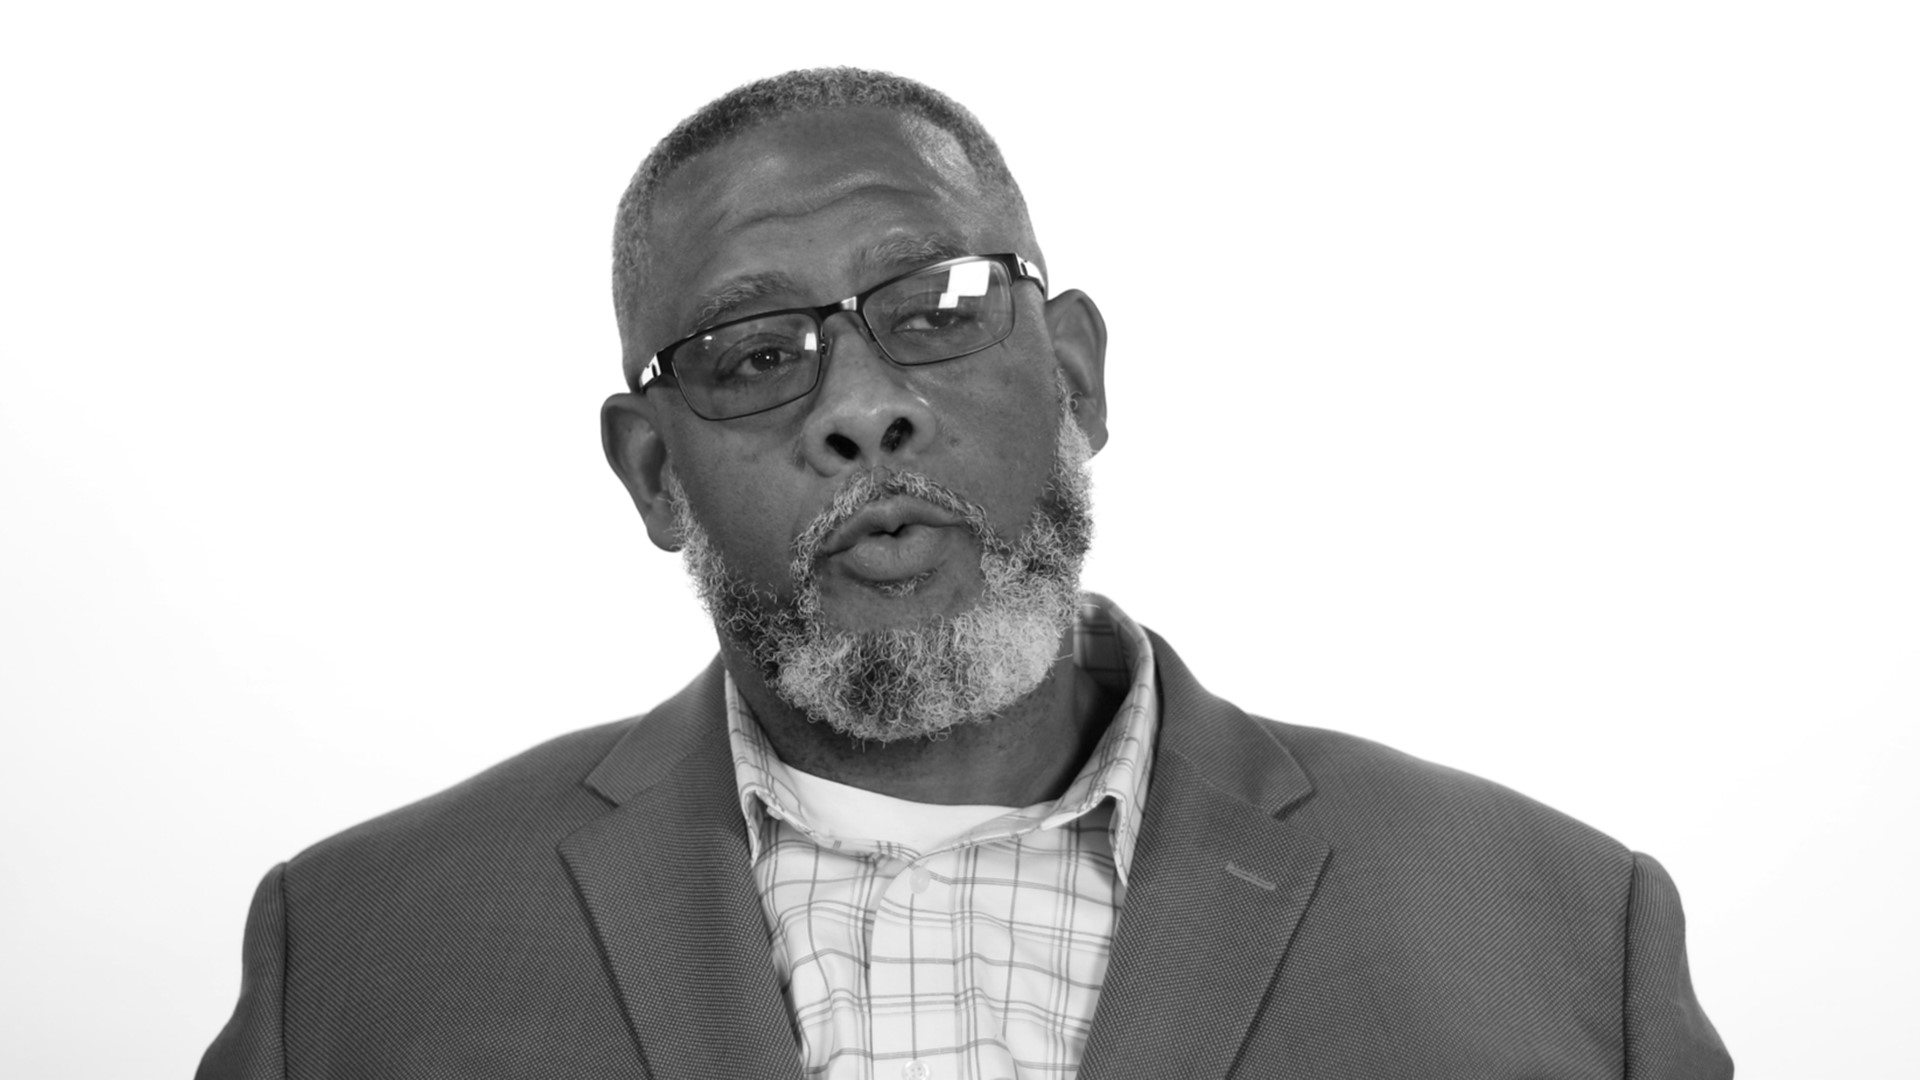 Rev. James Watkins of New Hope Baptist Church in Spokane joins Let's Talk to discuss racism he has faced in Spokane and Idaho.